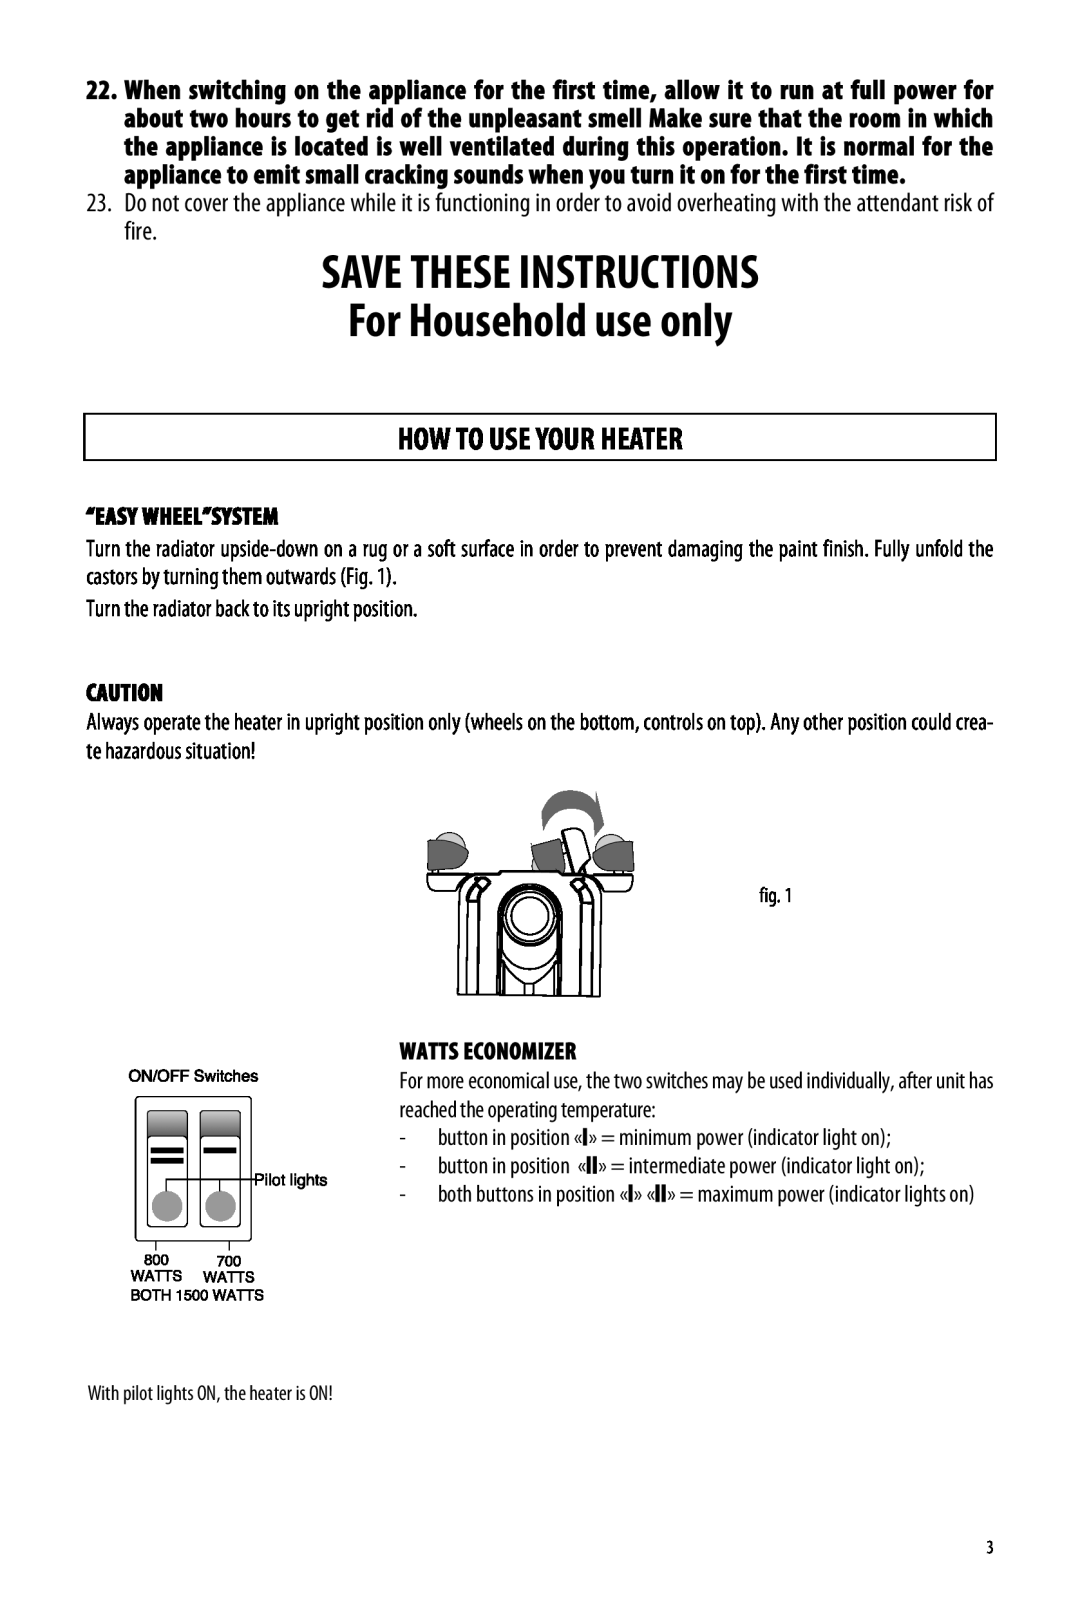 DeLonghi EW7707CBC, EW7707CMC SAVE THESE INSTRUCTIONS For Household use only, How To Use Your Heater, “Easy Wheel”System 